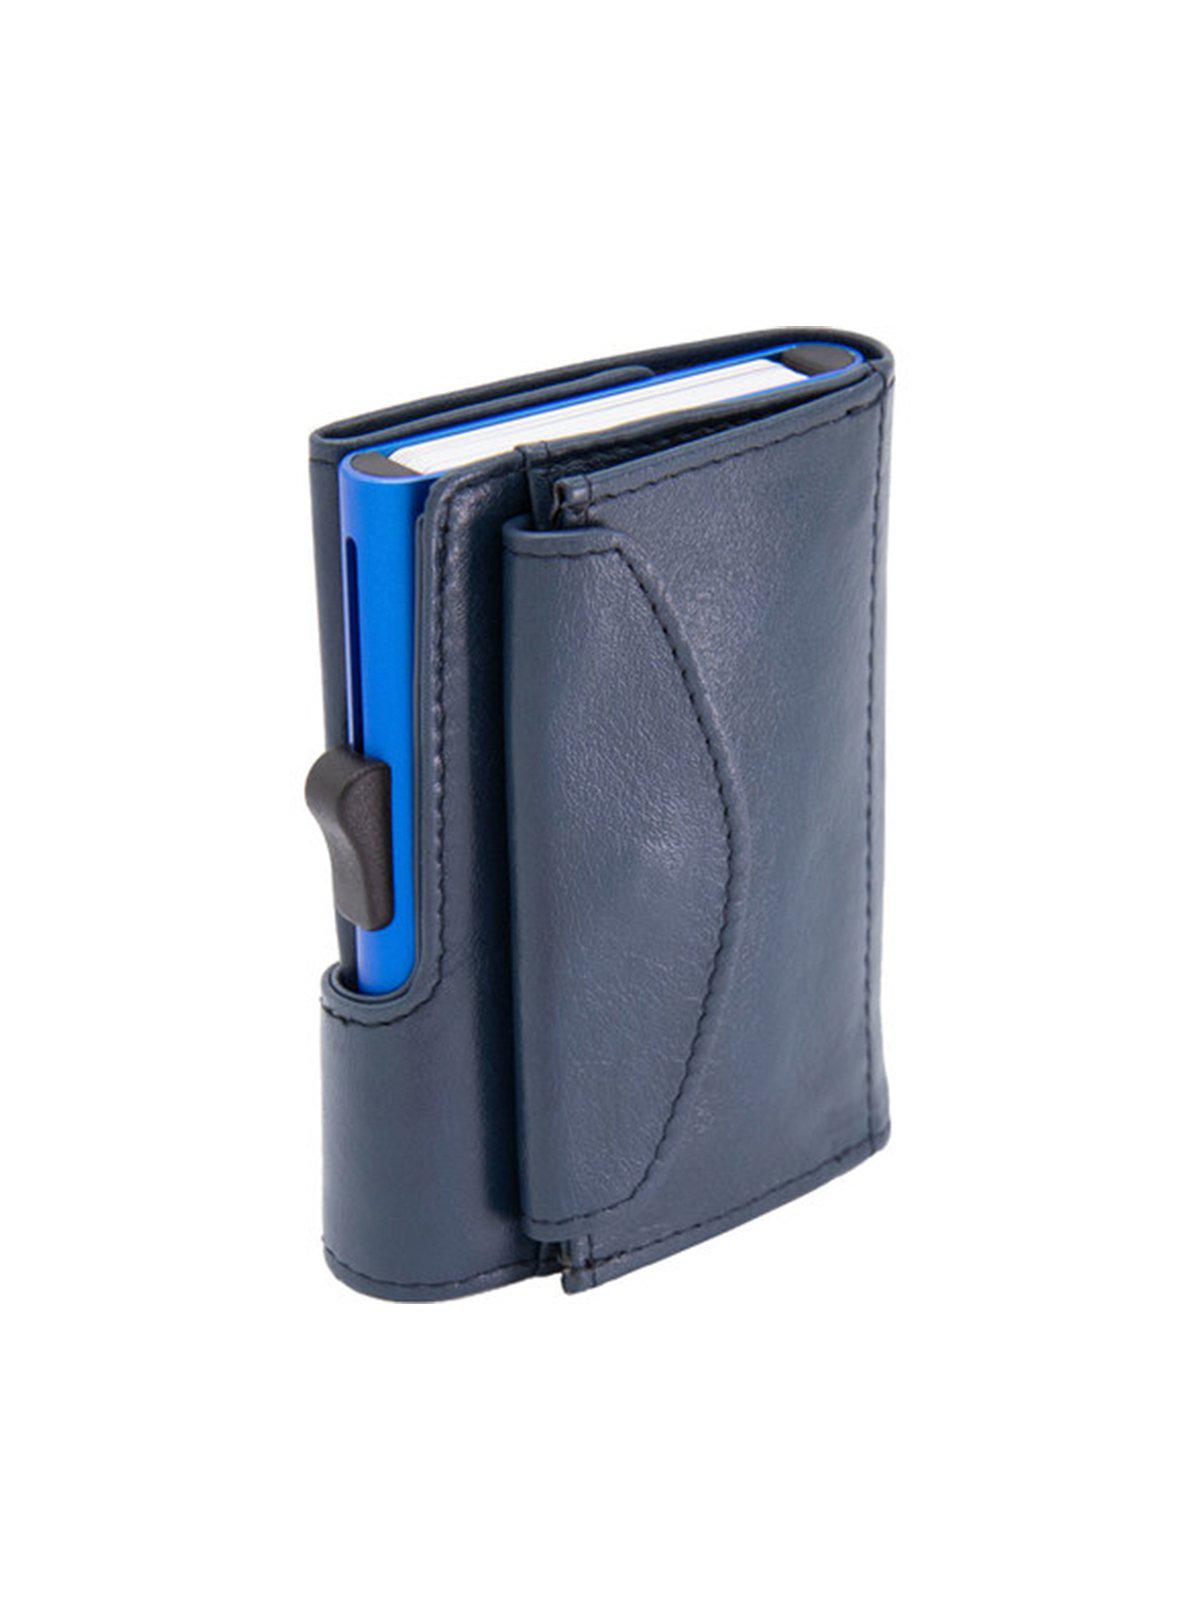 C-Secure XL Italian Leather Wallet with Coin Pouch RFID Cobalto Blue - MORE by Morello Indonesia